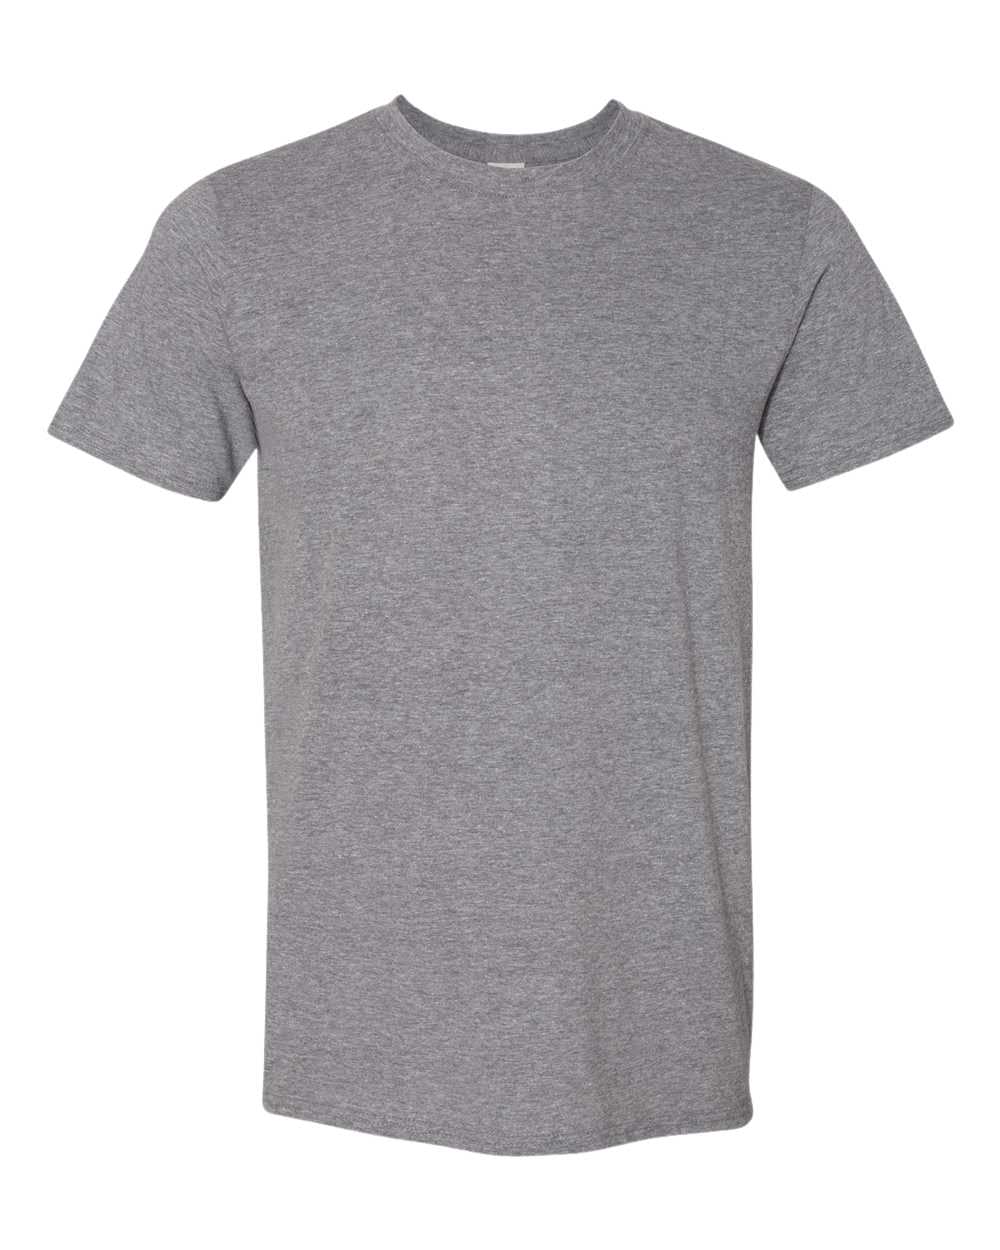 Sample of Gray T-shirt (Gildan softstyle may be substituted for Hanes if supply runs low)